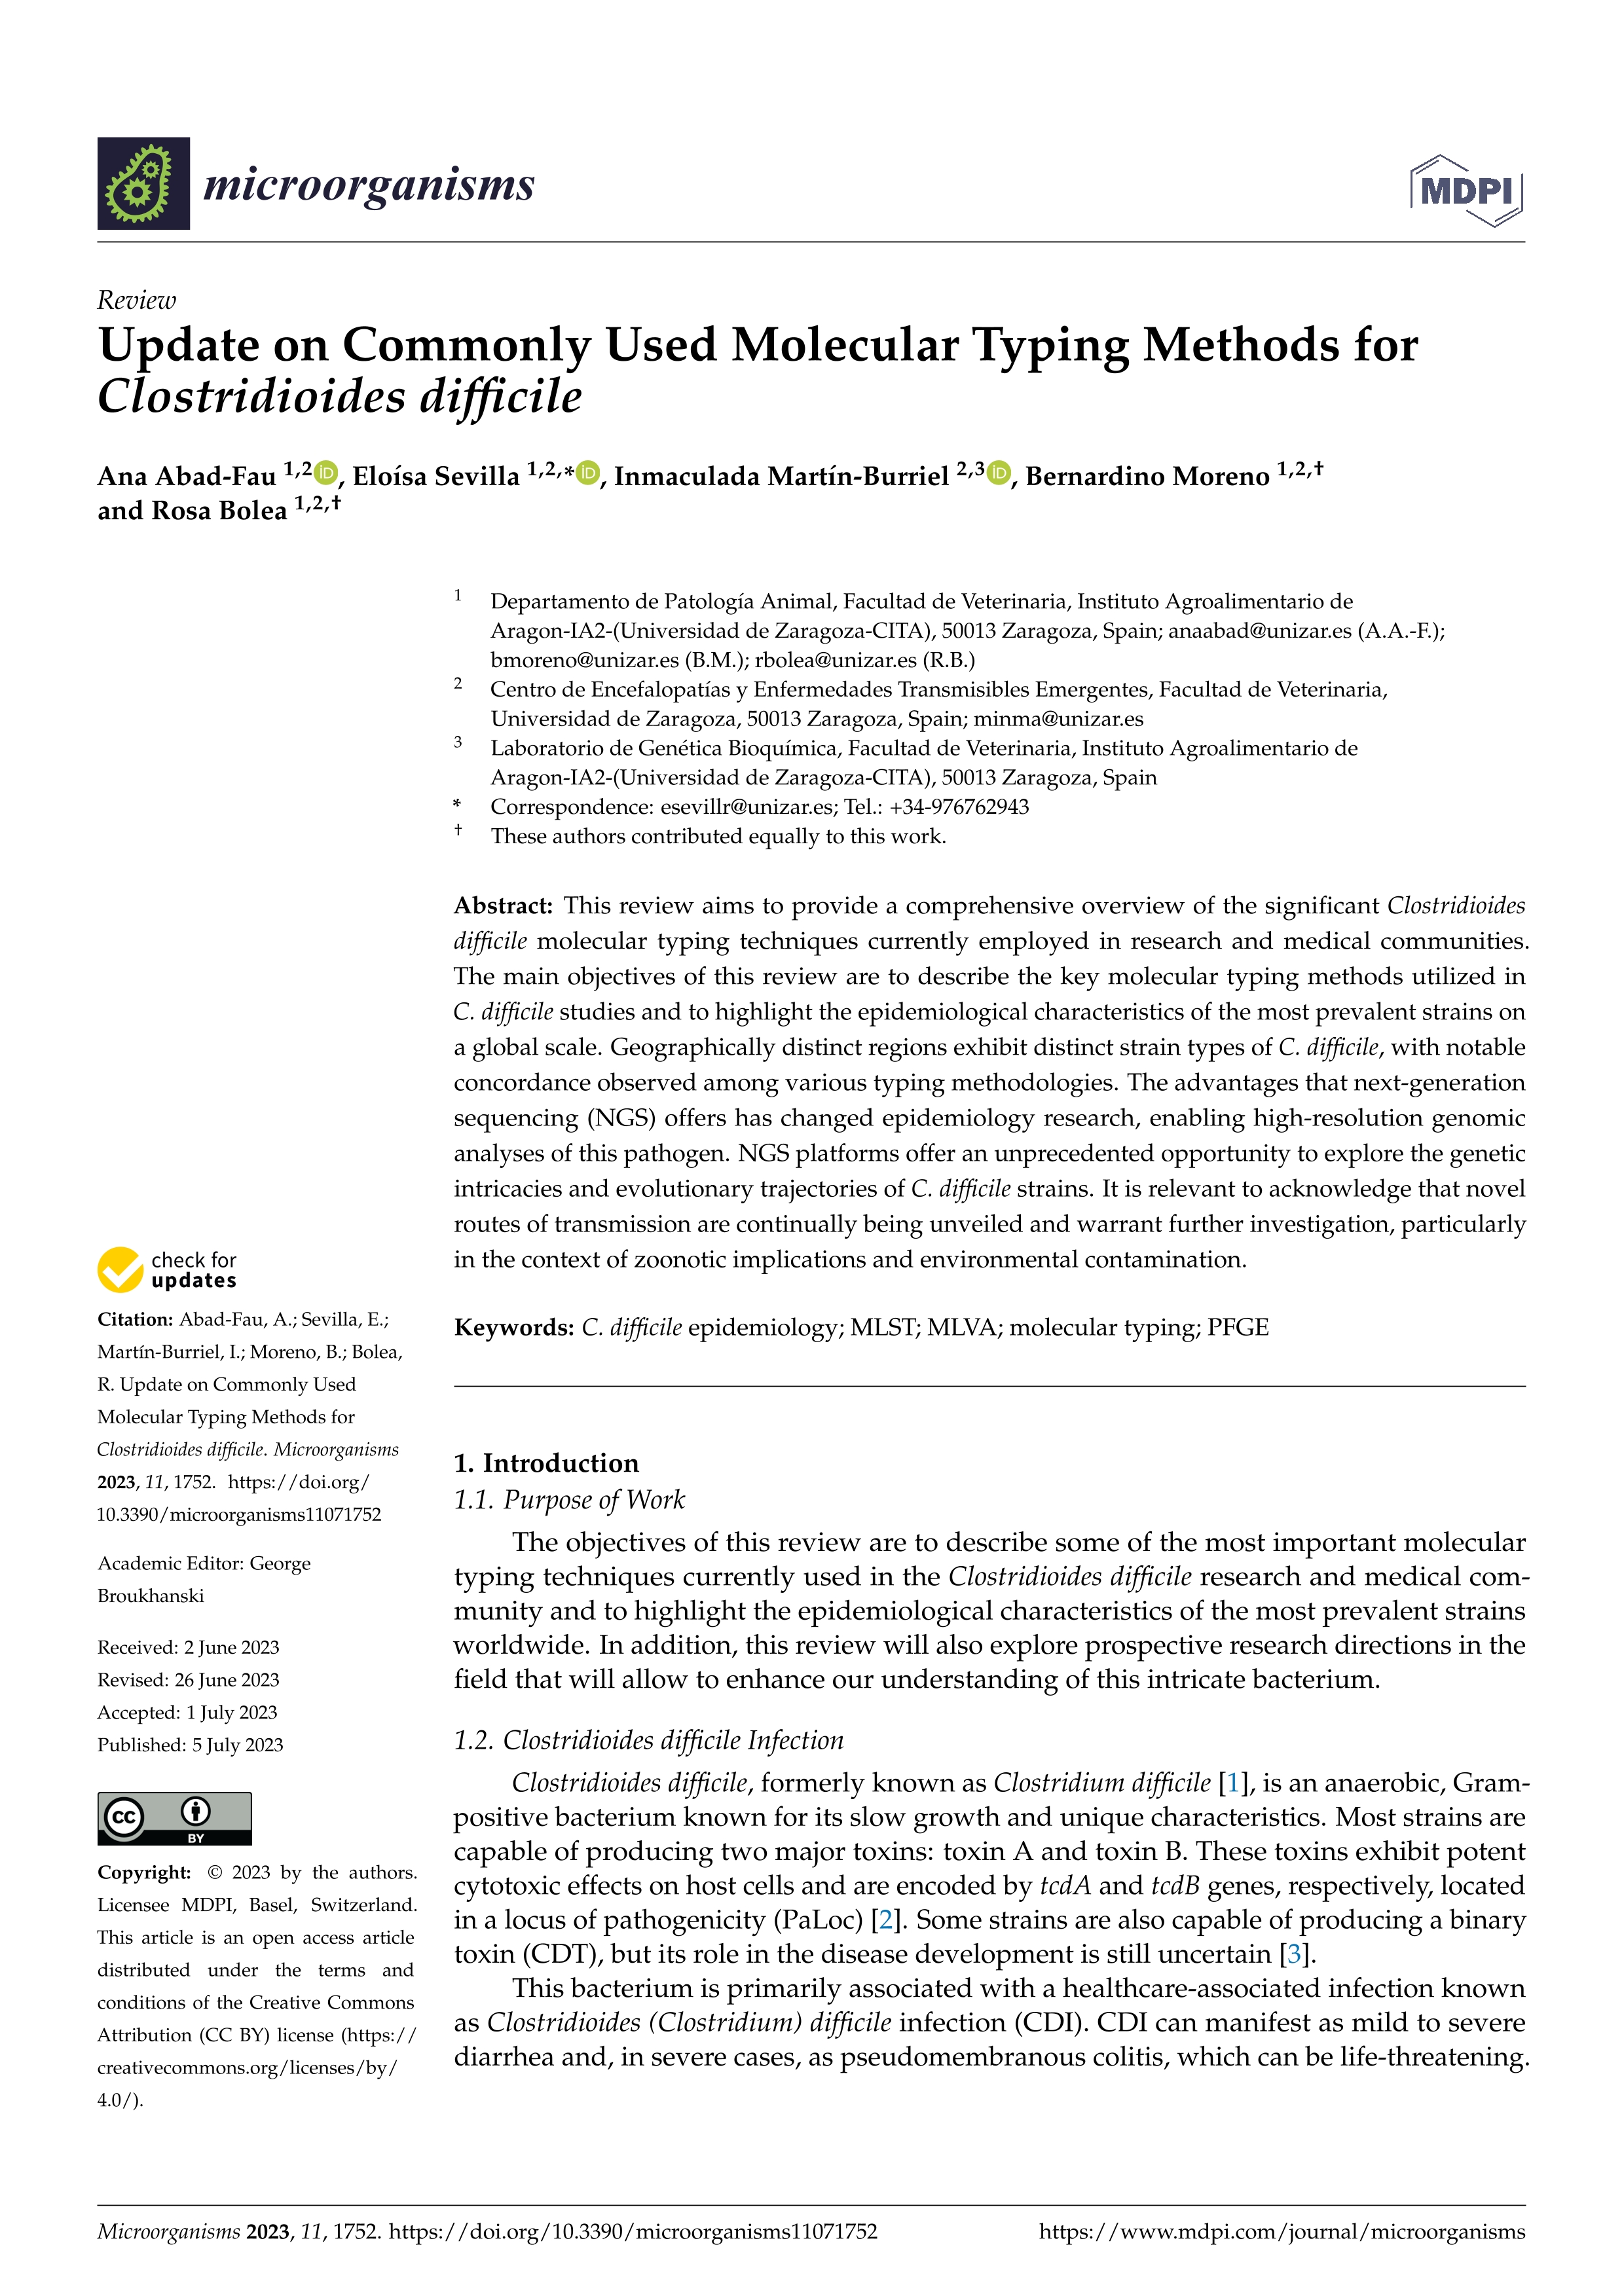 Update on commonly used molecular typing methods for Clostridioides Difficile